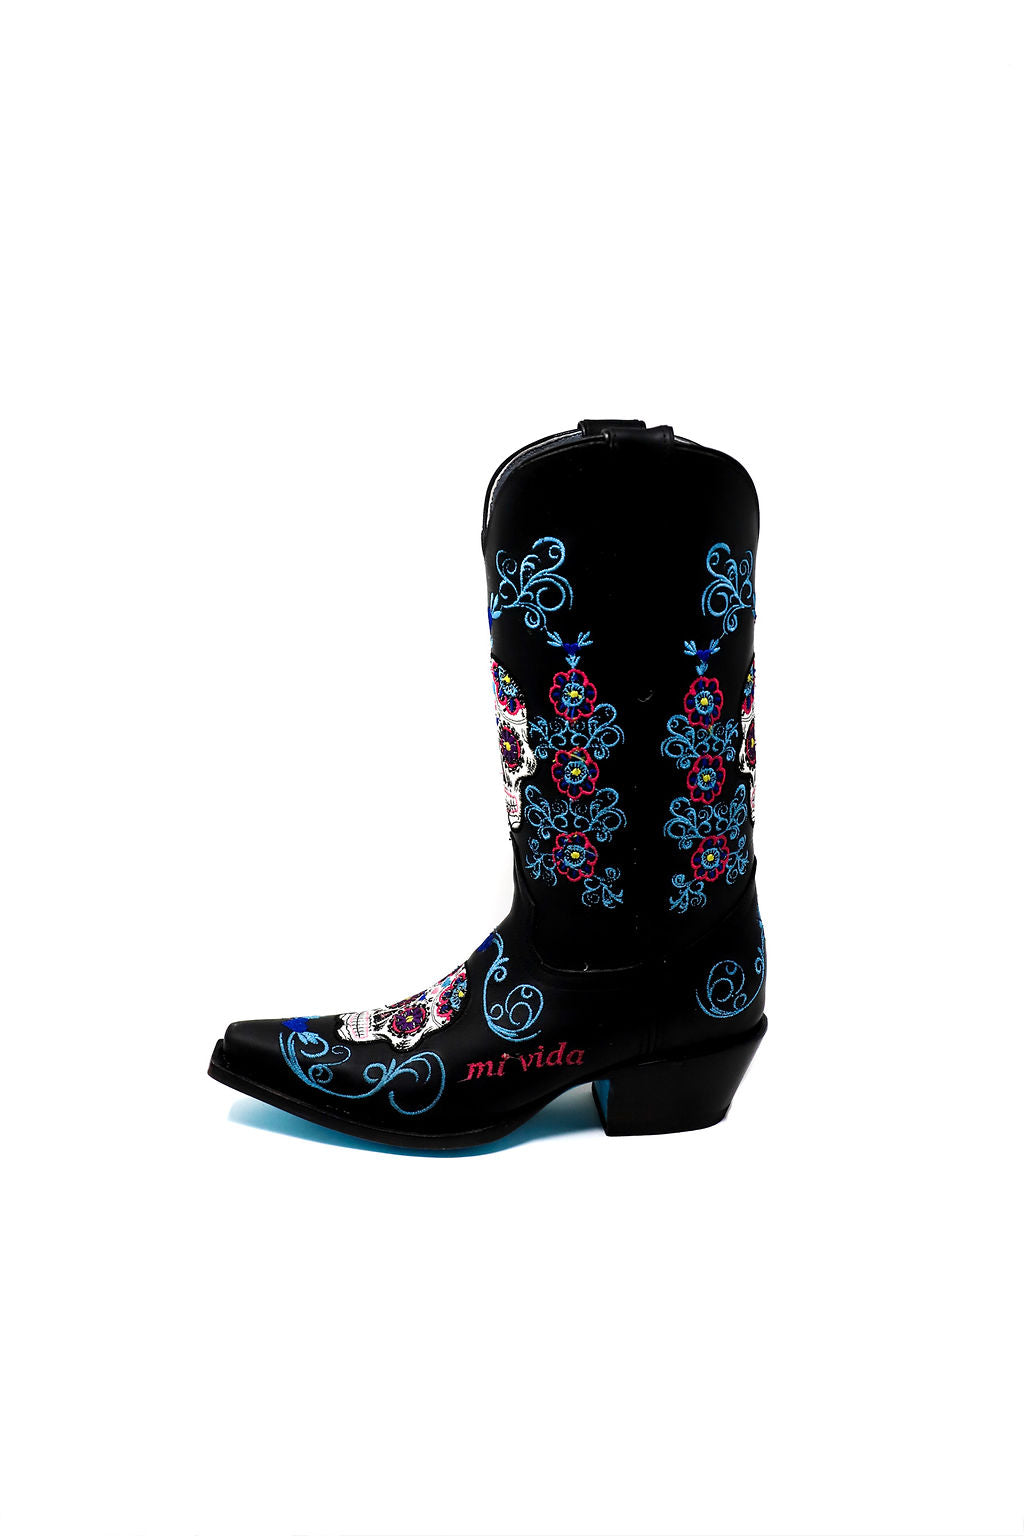 Day of the Dead Sugar Skull Boots